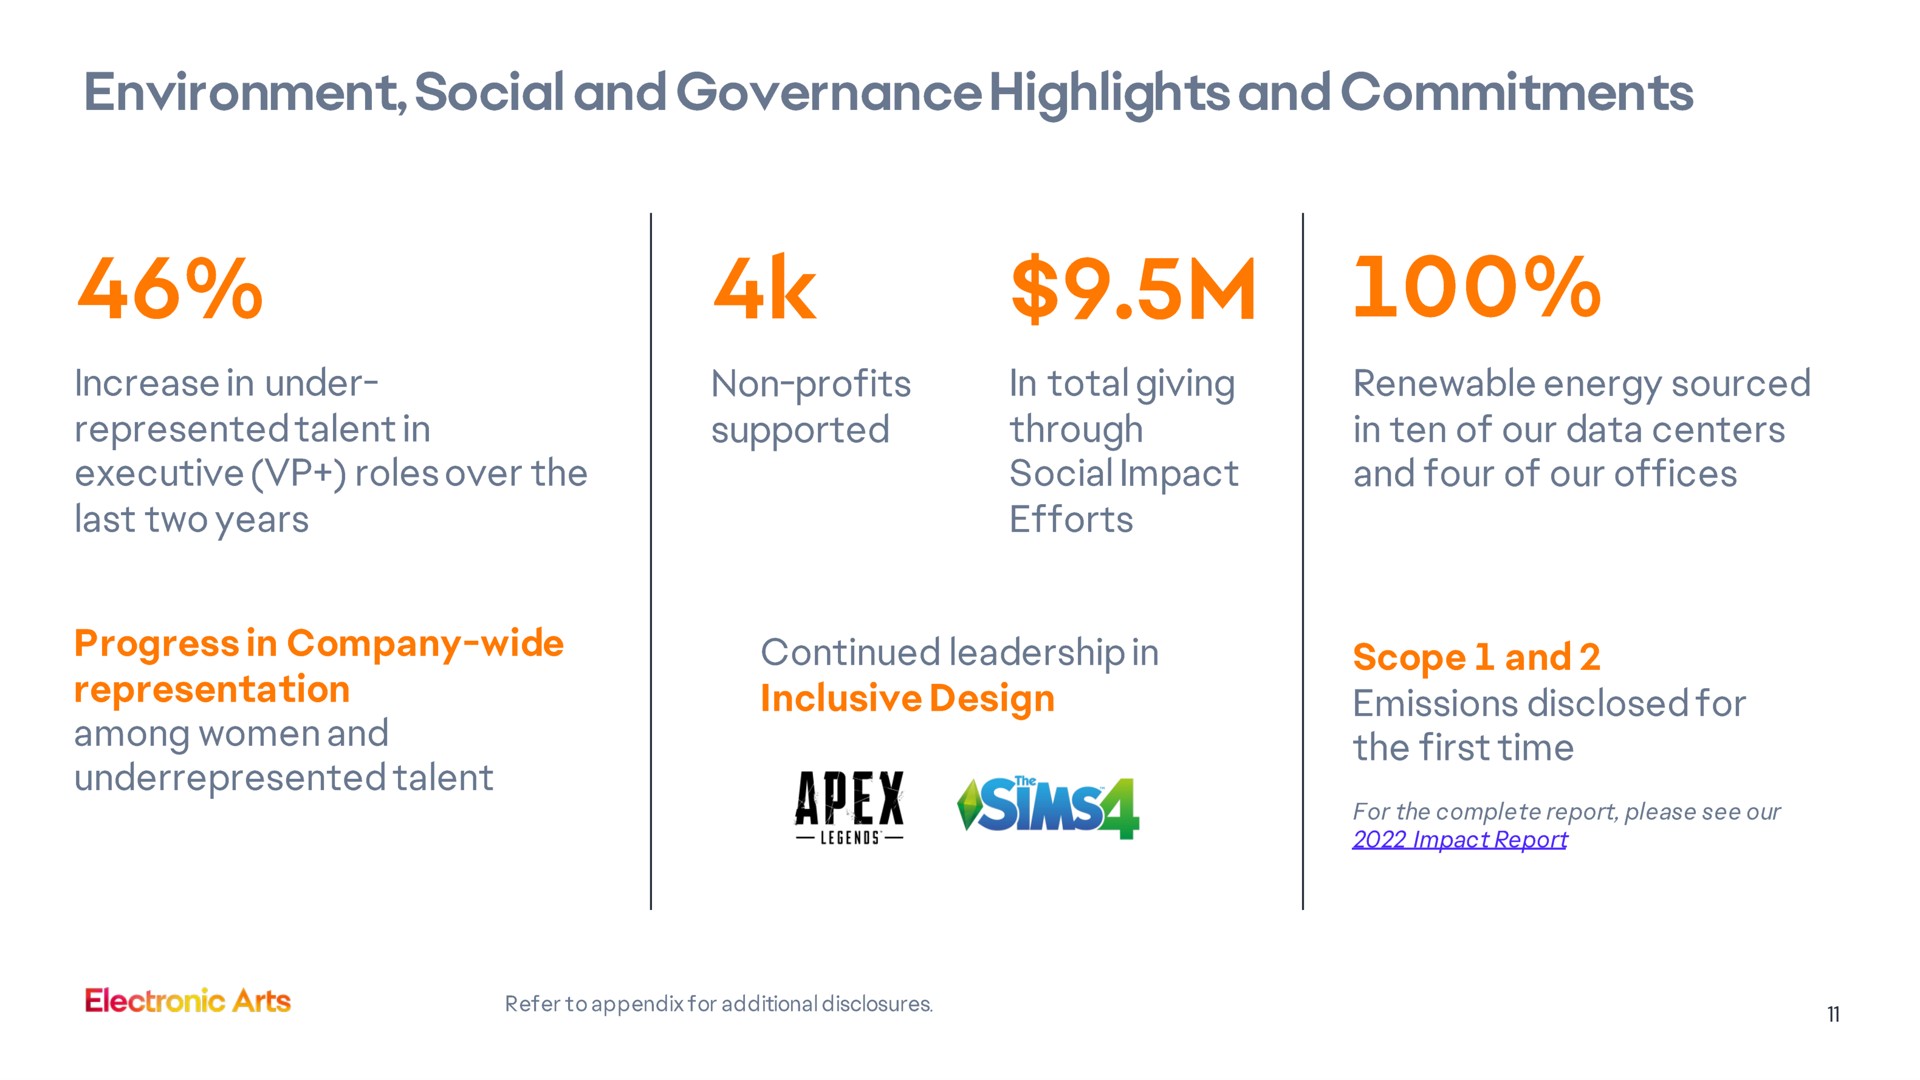 environment social and governance highlights and commitments increase in under represented talent in executive roles over the last two years non profits supported in total giving through social impact efforts renewable energy sourced in ten of our data centers and four of our offices progress in company wide representation talent continued leadership in inclusive design tee scope and emissions disclosed for the first time impact report | Electronic Arts